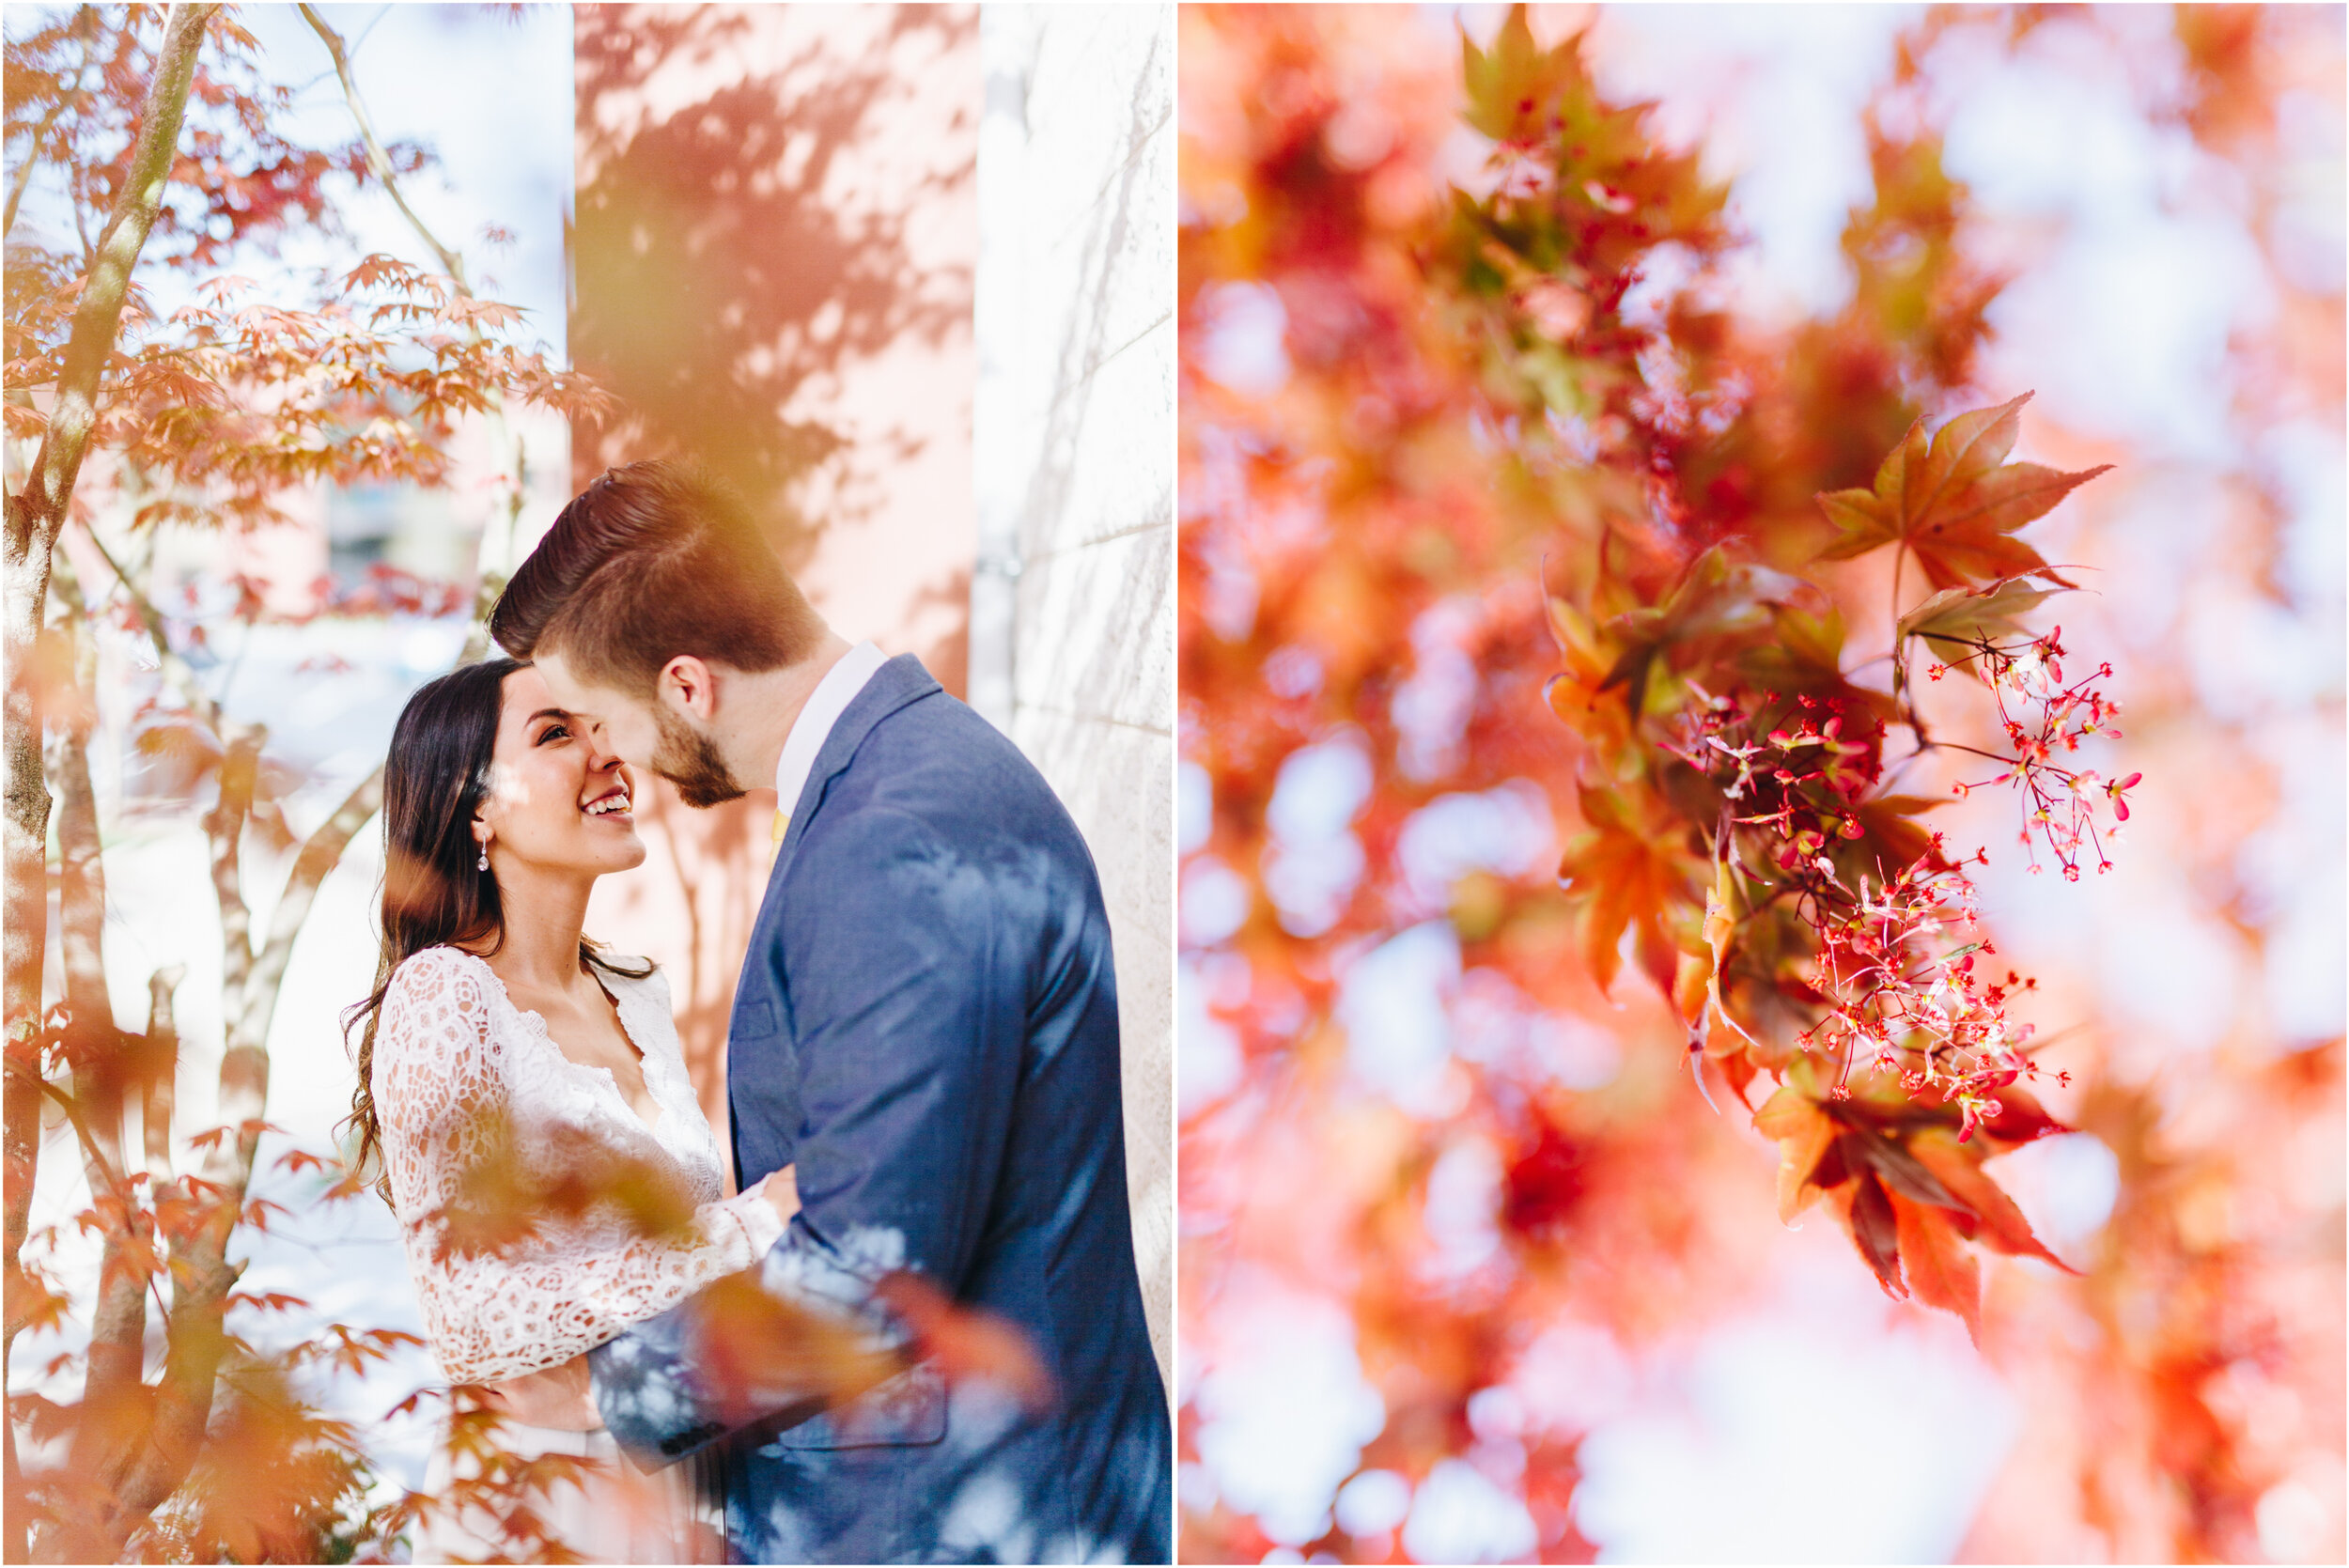 Wedding portraits with red leaves